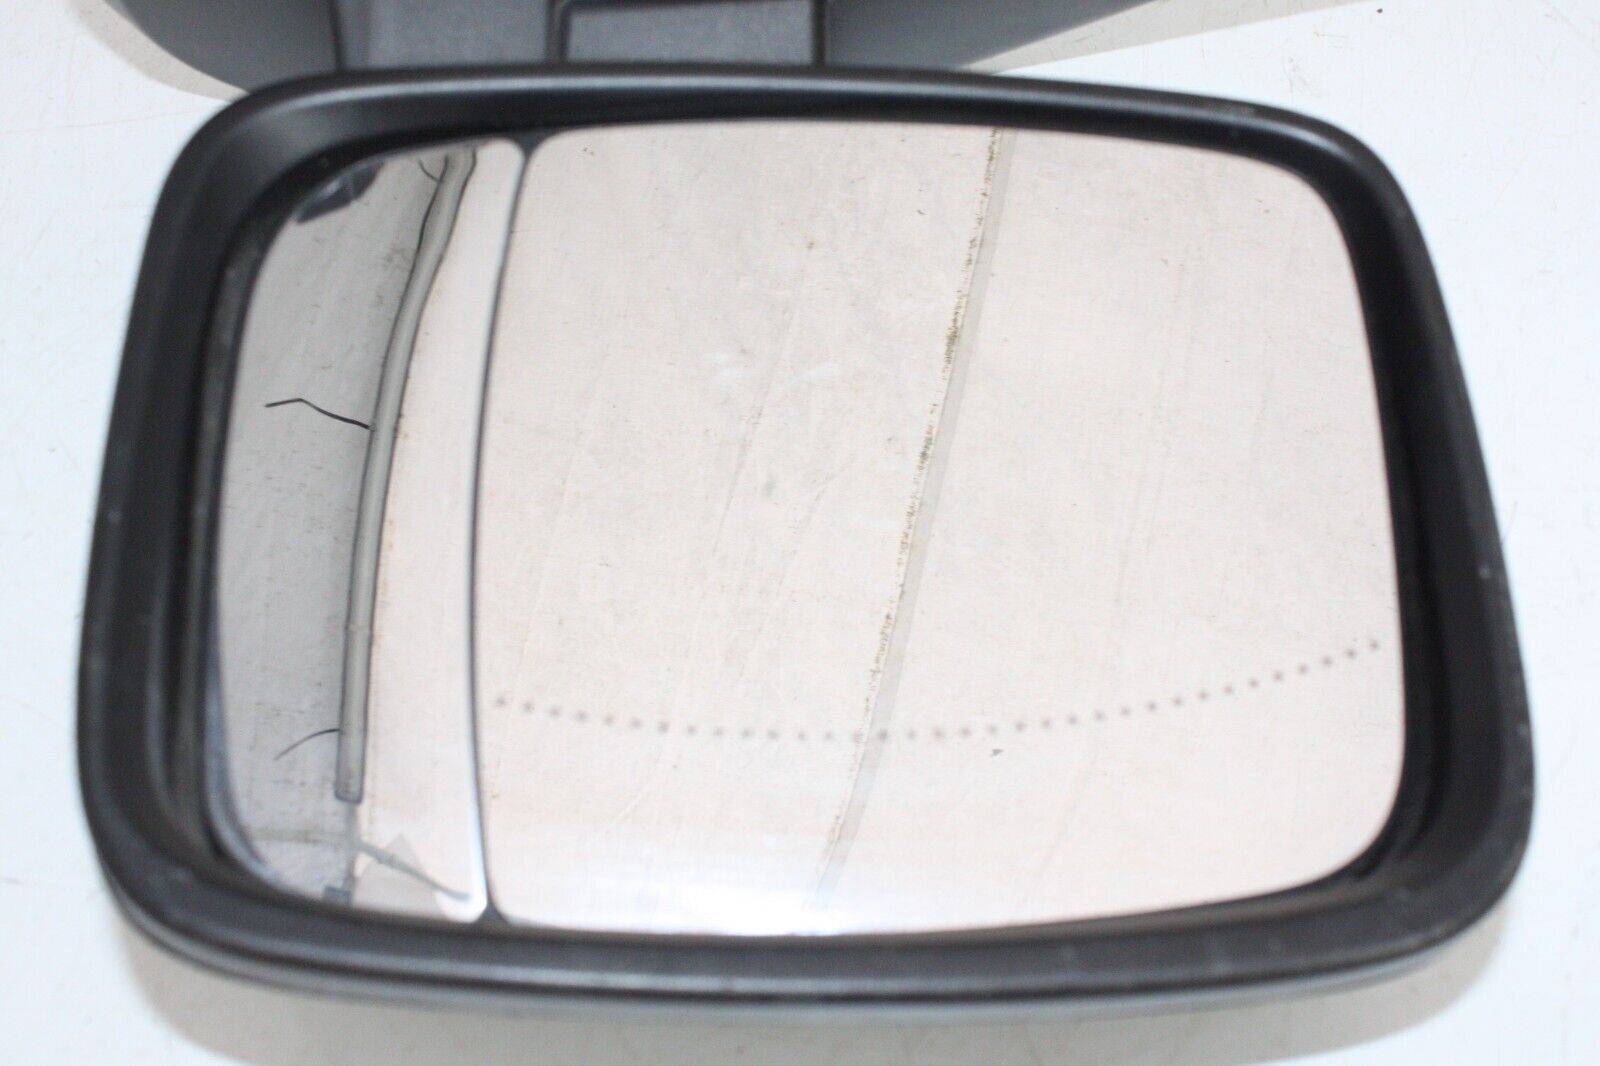 RENAULT-TRAFIC-RIGHT-SIDE-WING-MIRROR-2014-ON-175422229386-8